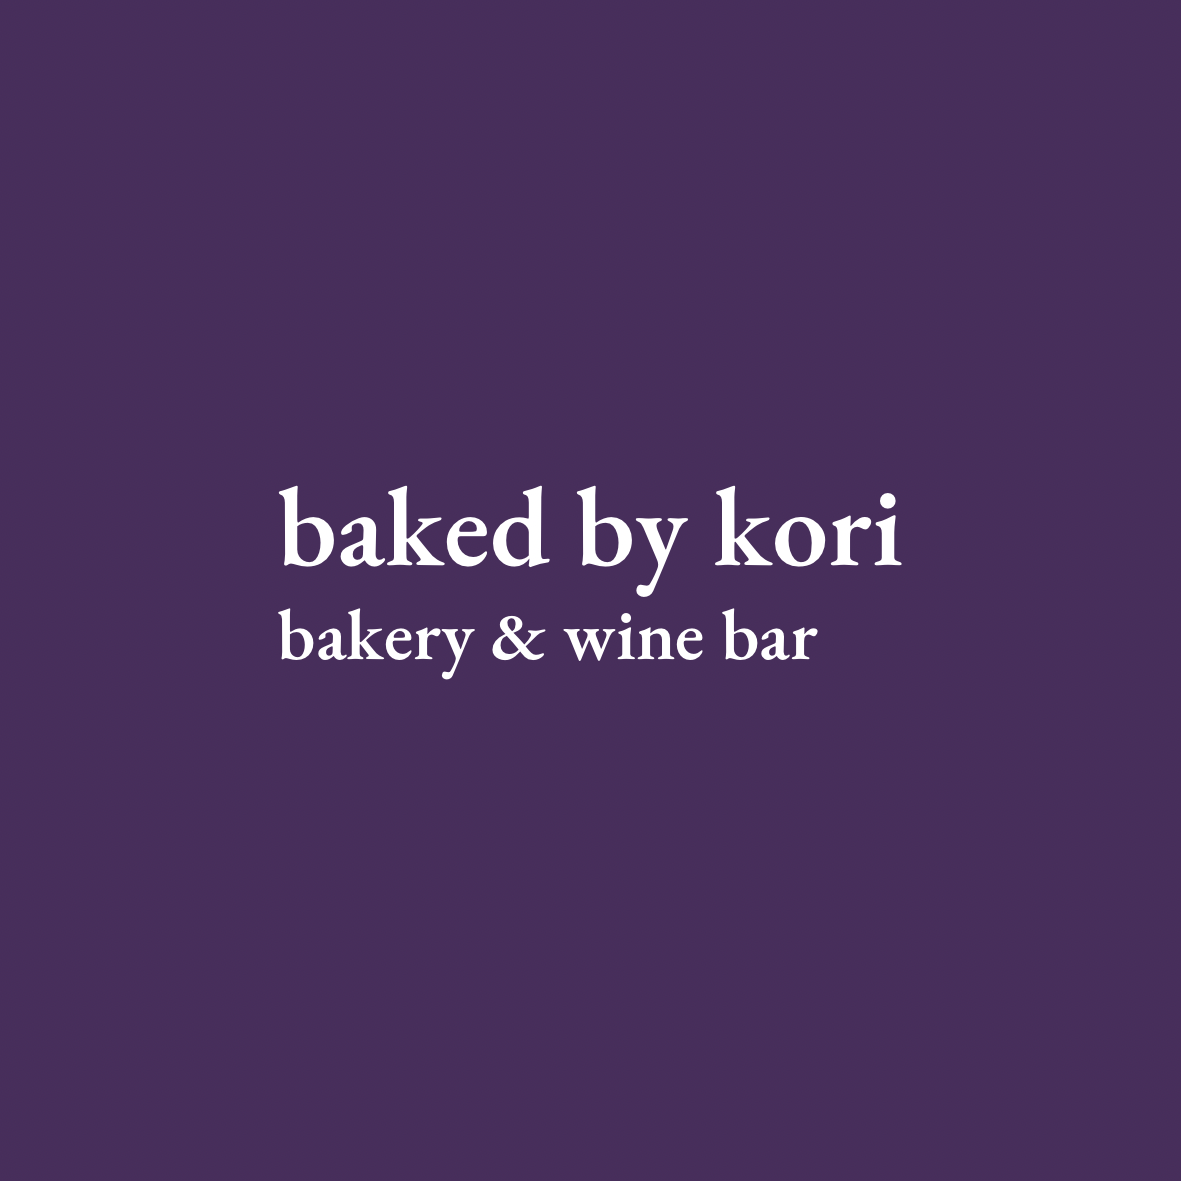 baked by kori